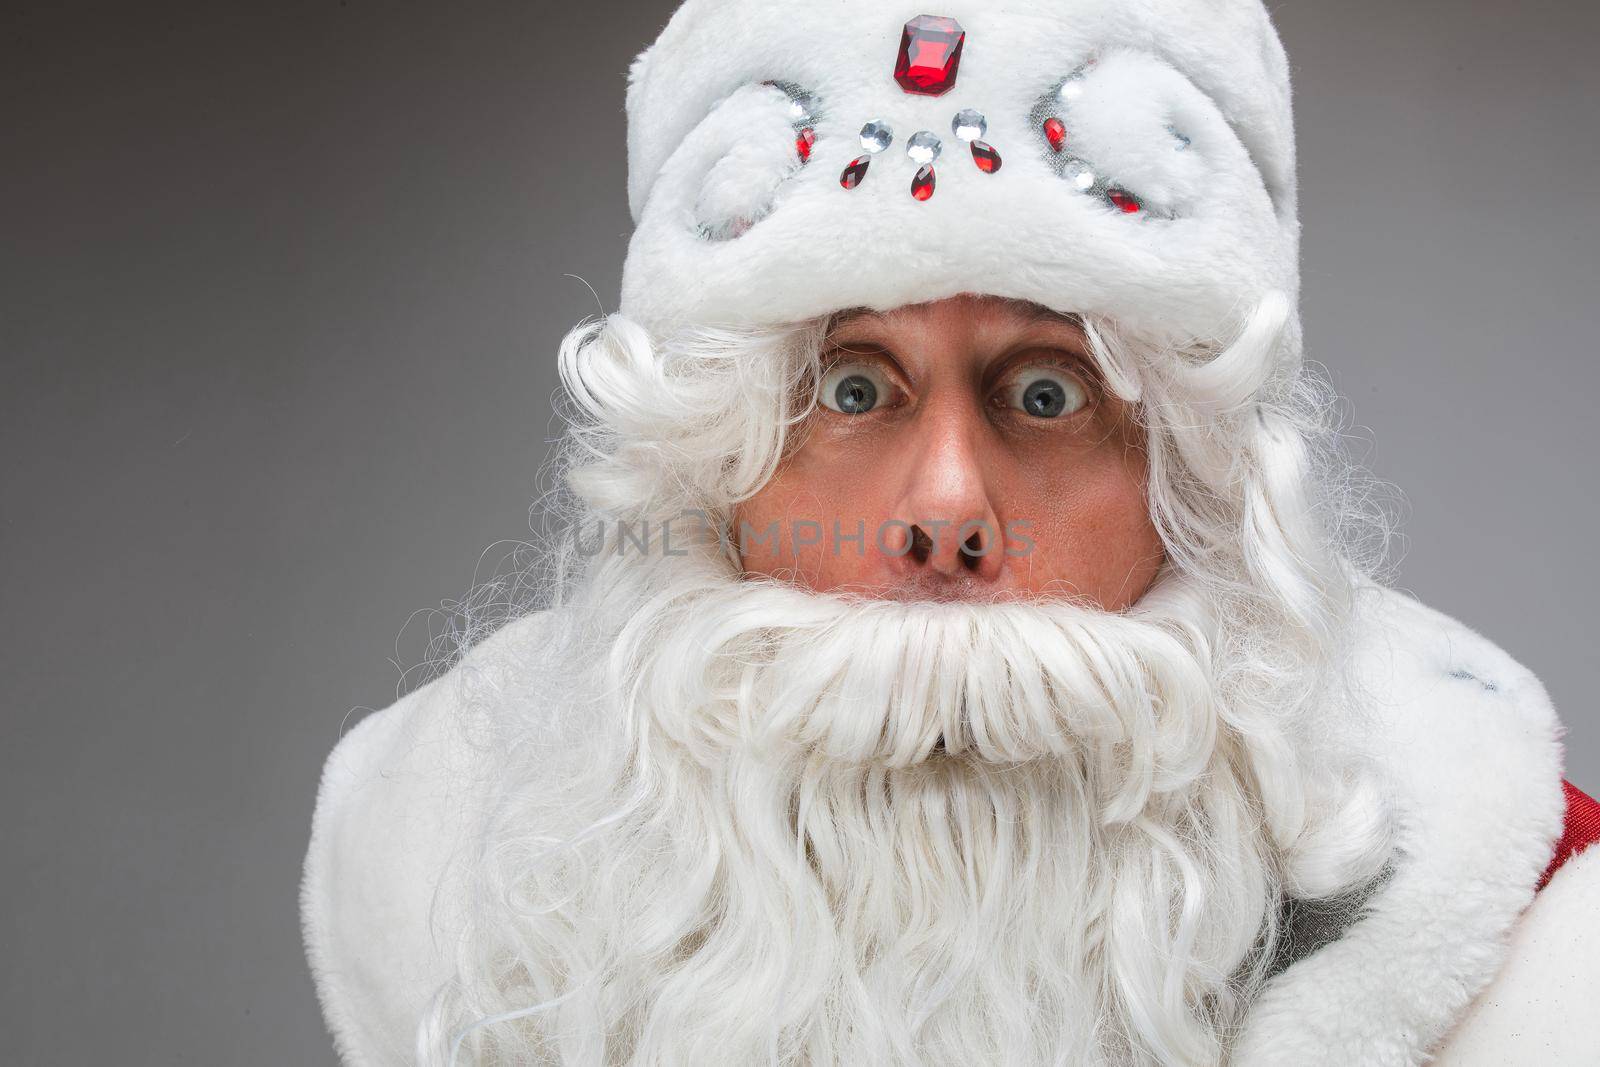 Stock photo of close-up of white-bearded Santa in white fancy hat with rhinestones looking wide-eyed at camera showing astonishment or shock.